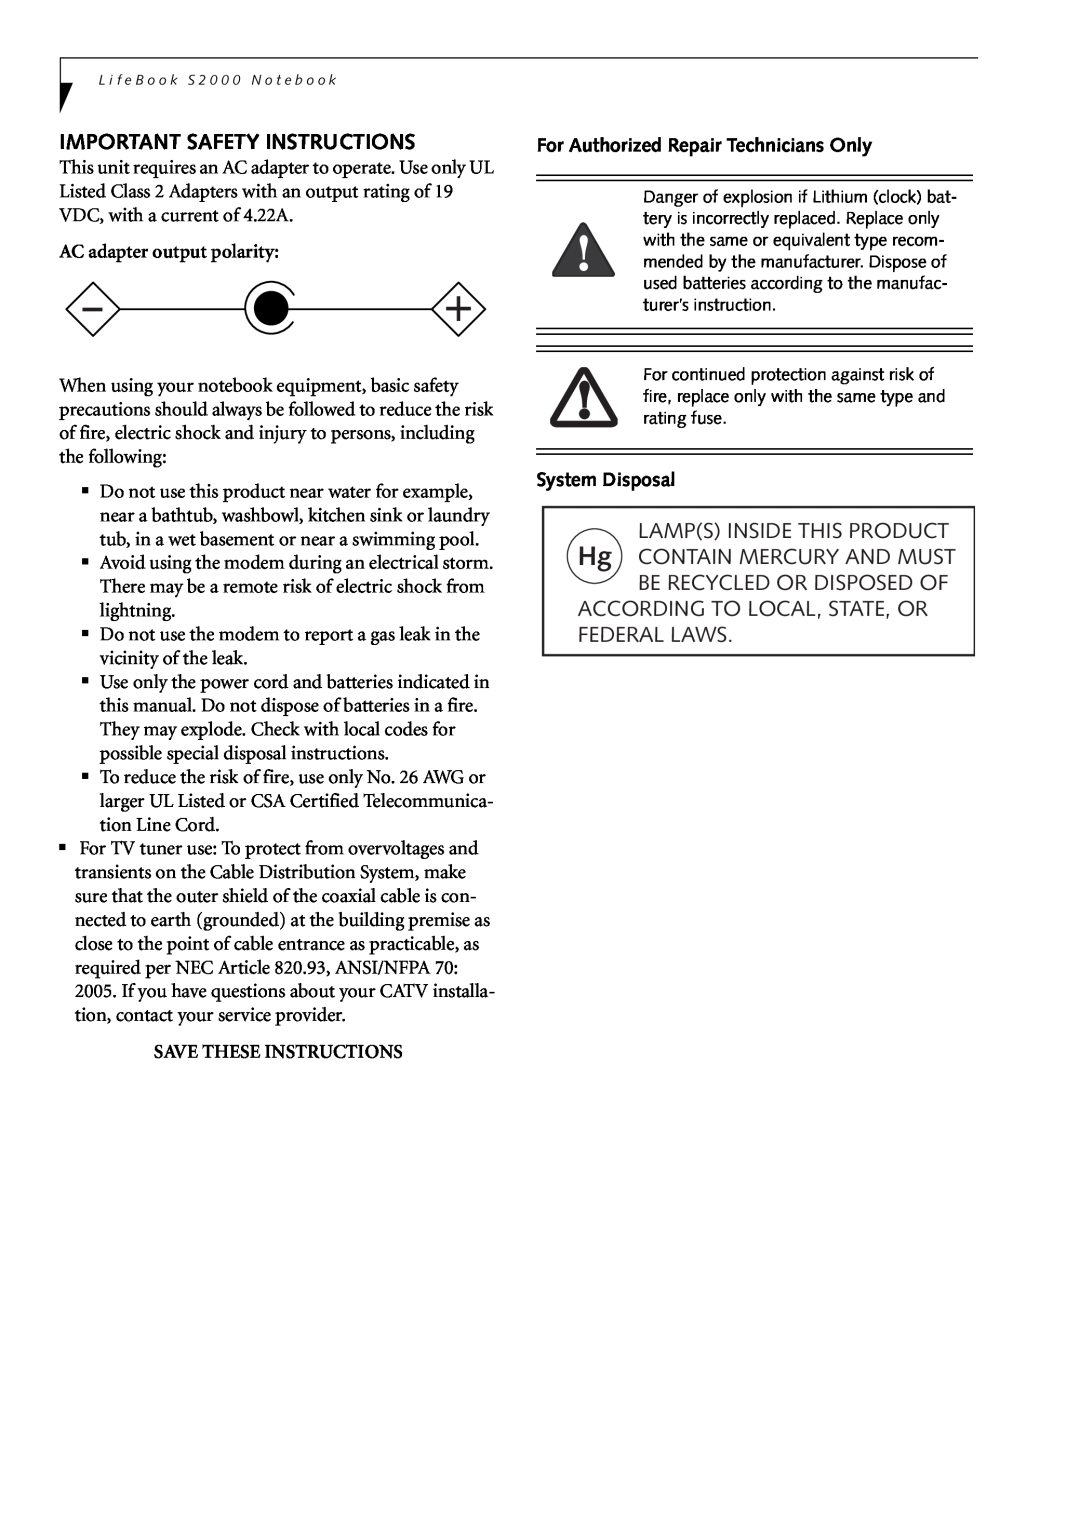 Fujitsu Siemens Computers S2210 Important Safety Instructions, According To Local, State, Or Federal Laws, System Disposal 